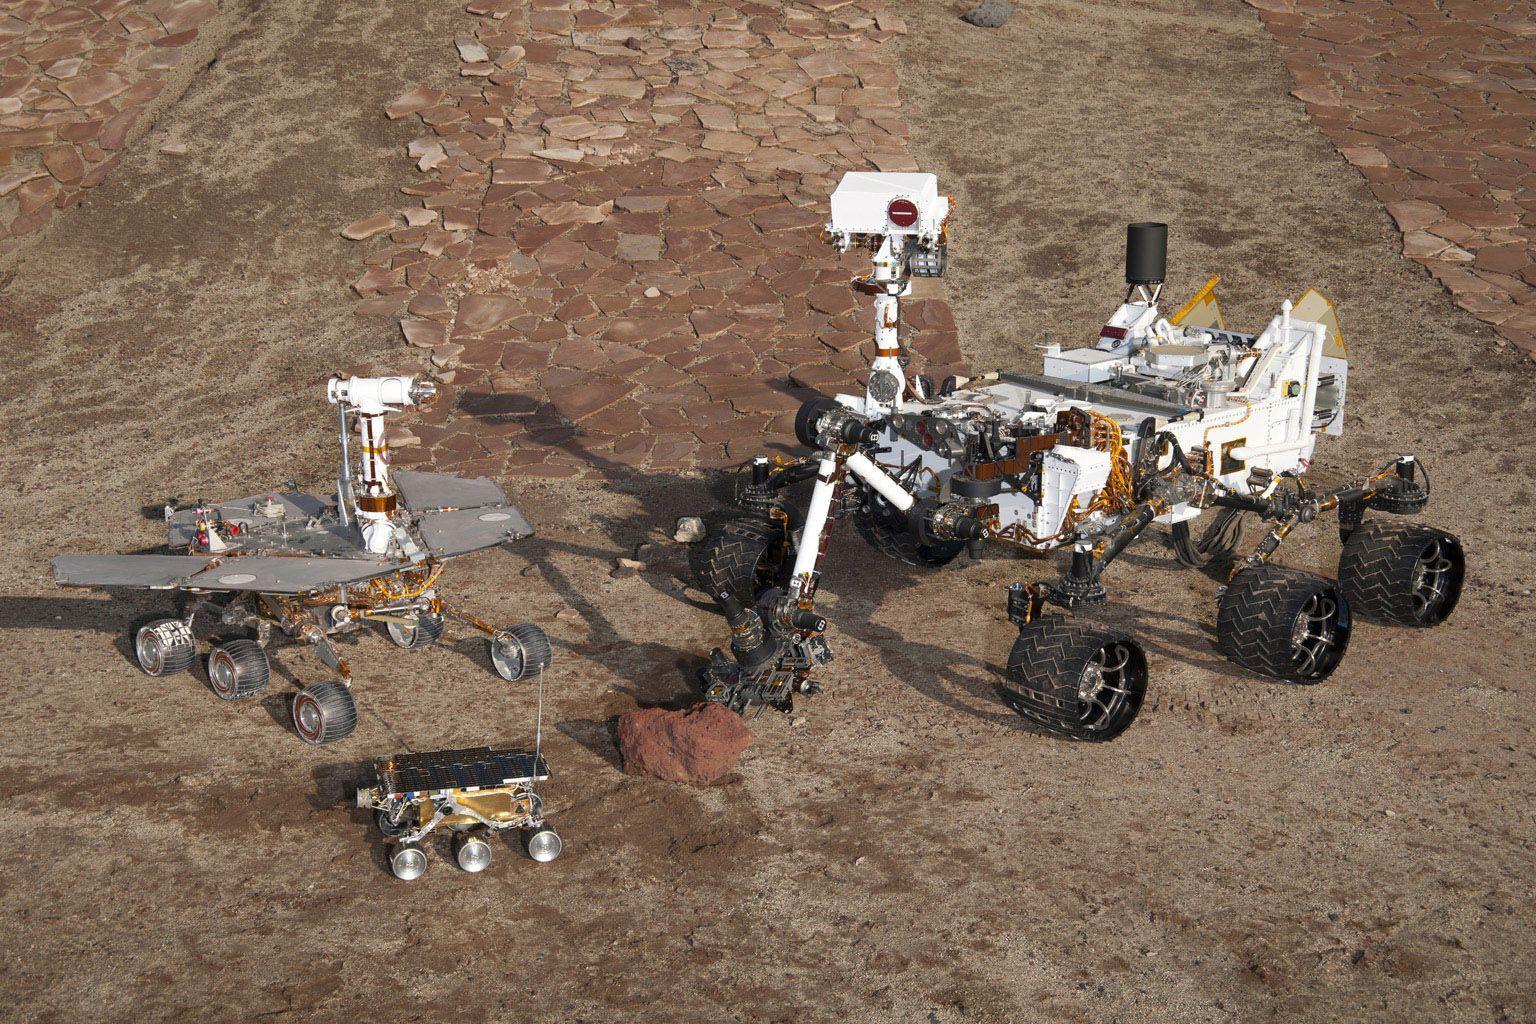 Space Image. Three Generations in Mars Yard, High Viewpoint